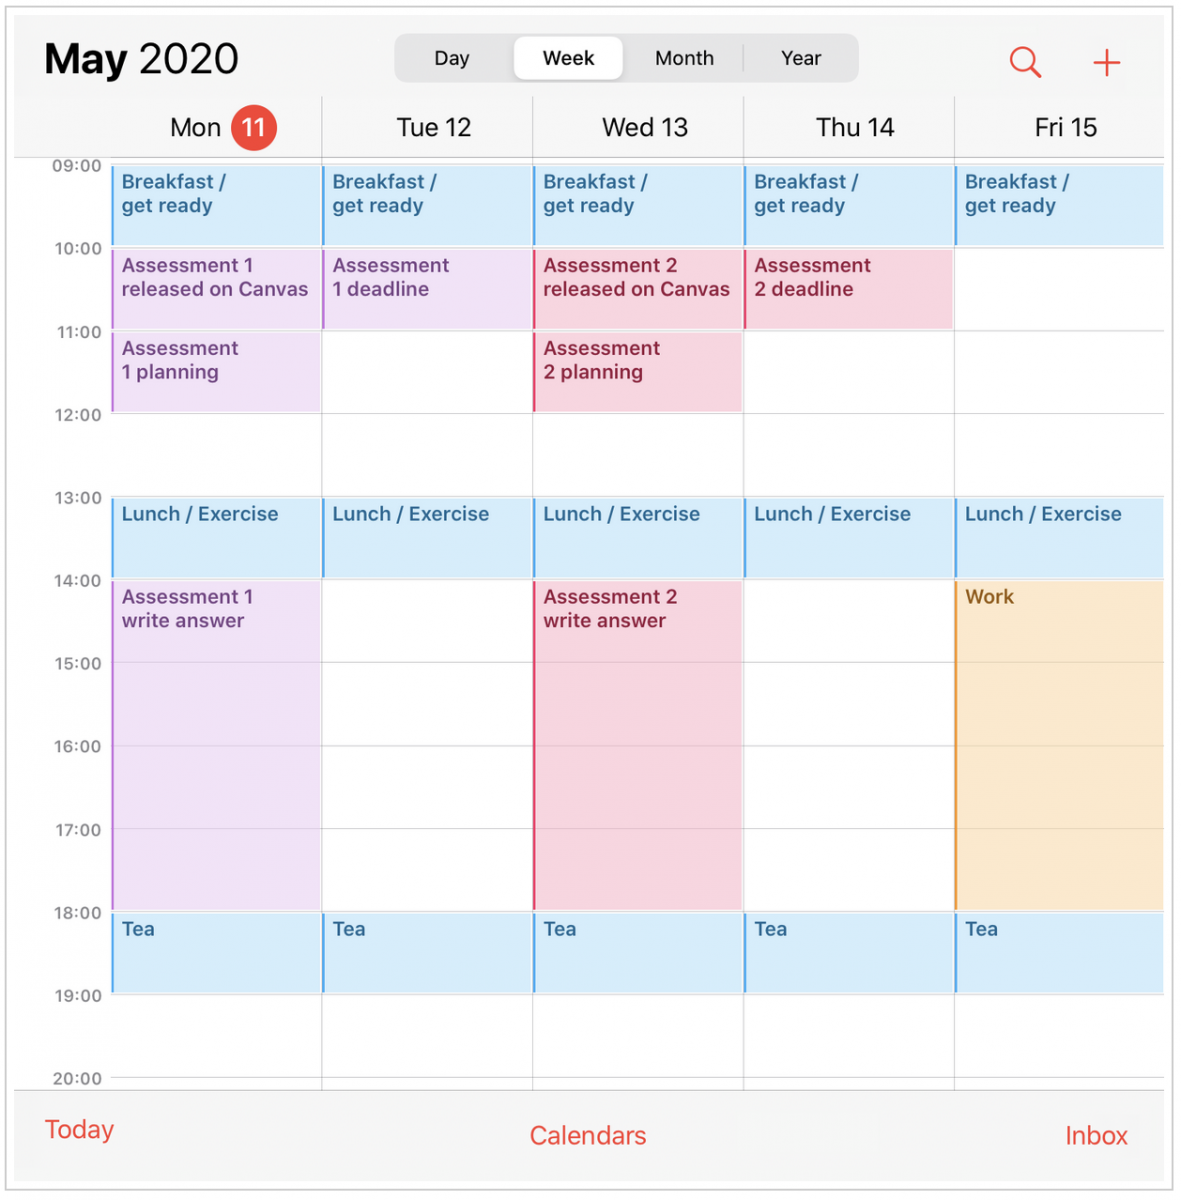 An image of a 2020 calendar with planning deadlines added